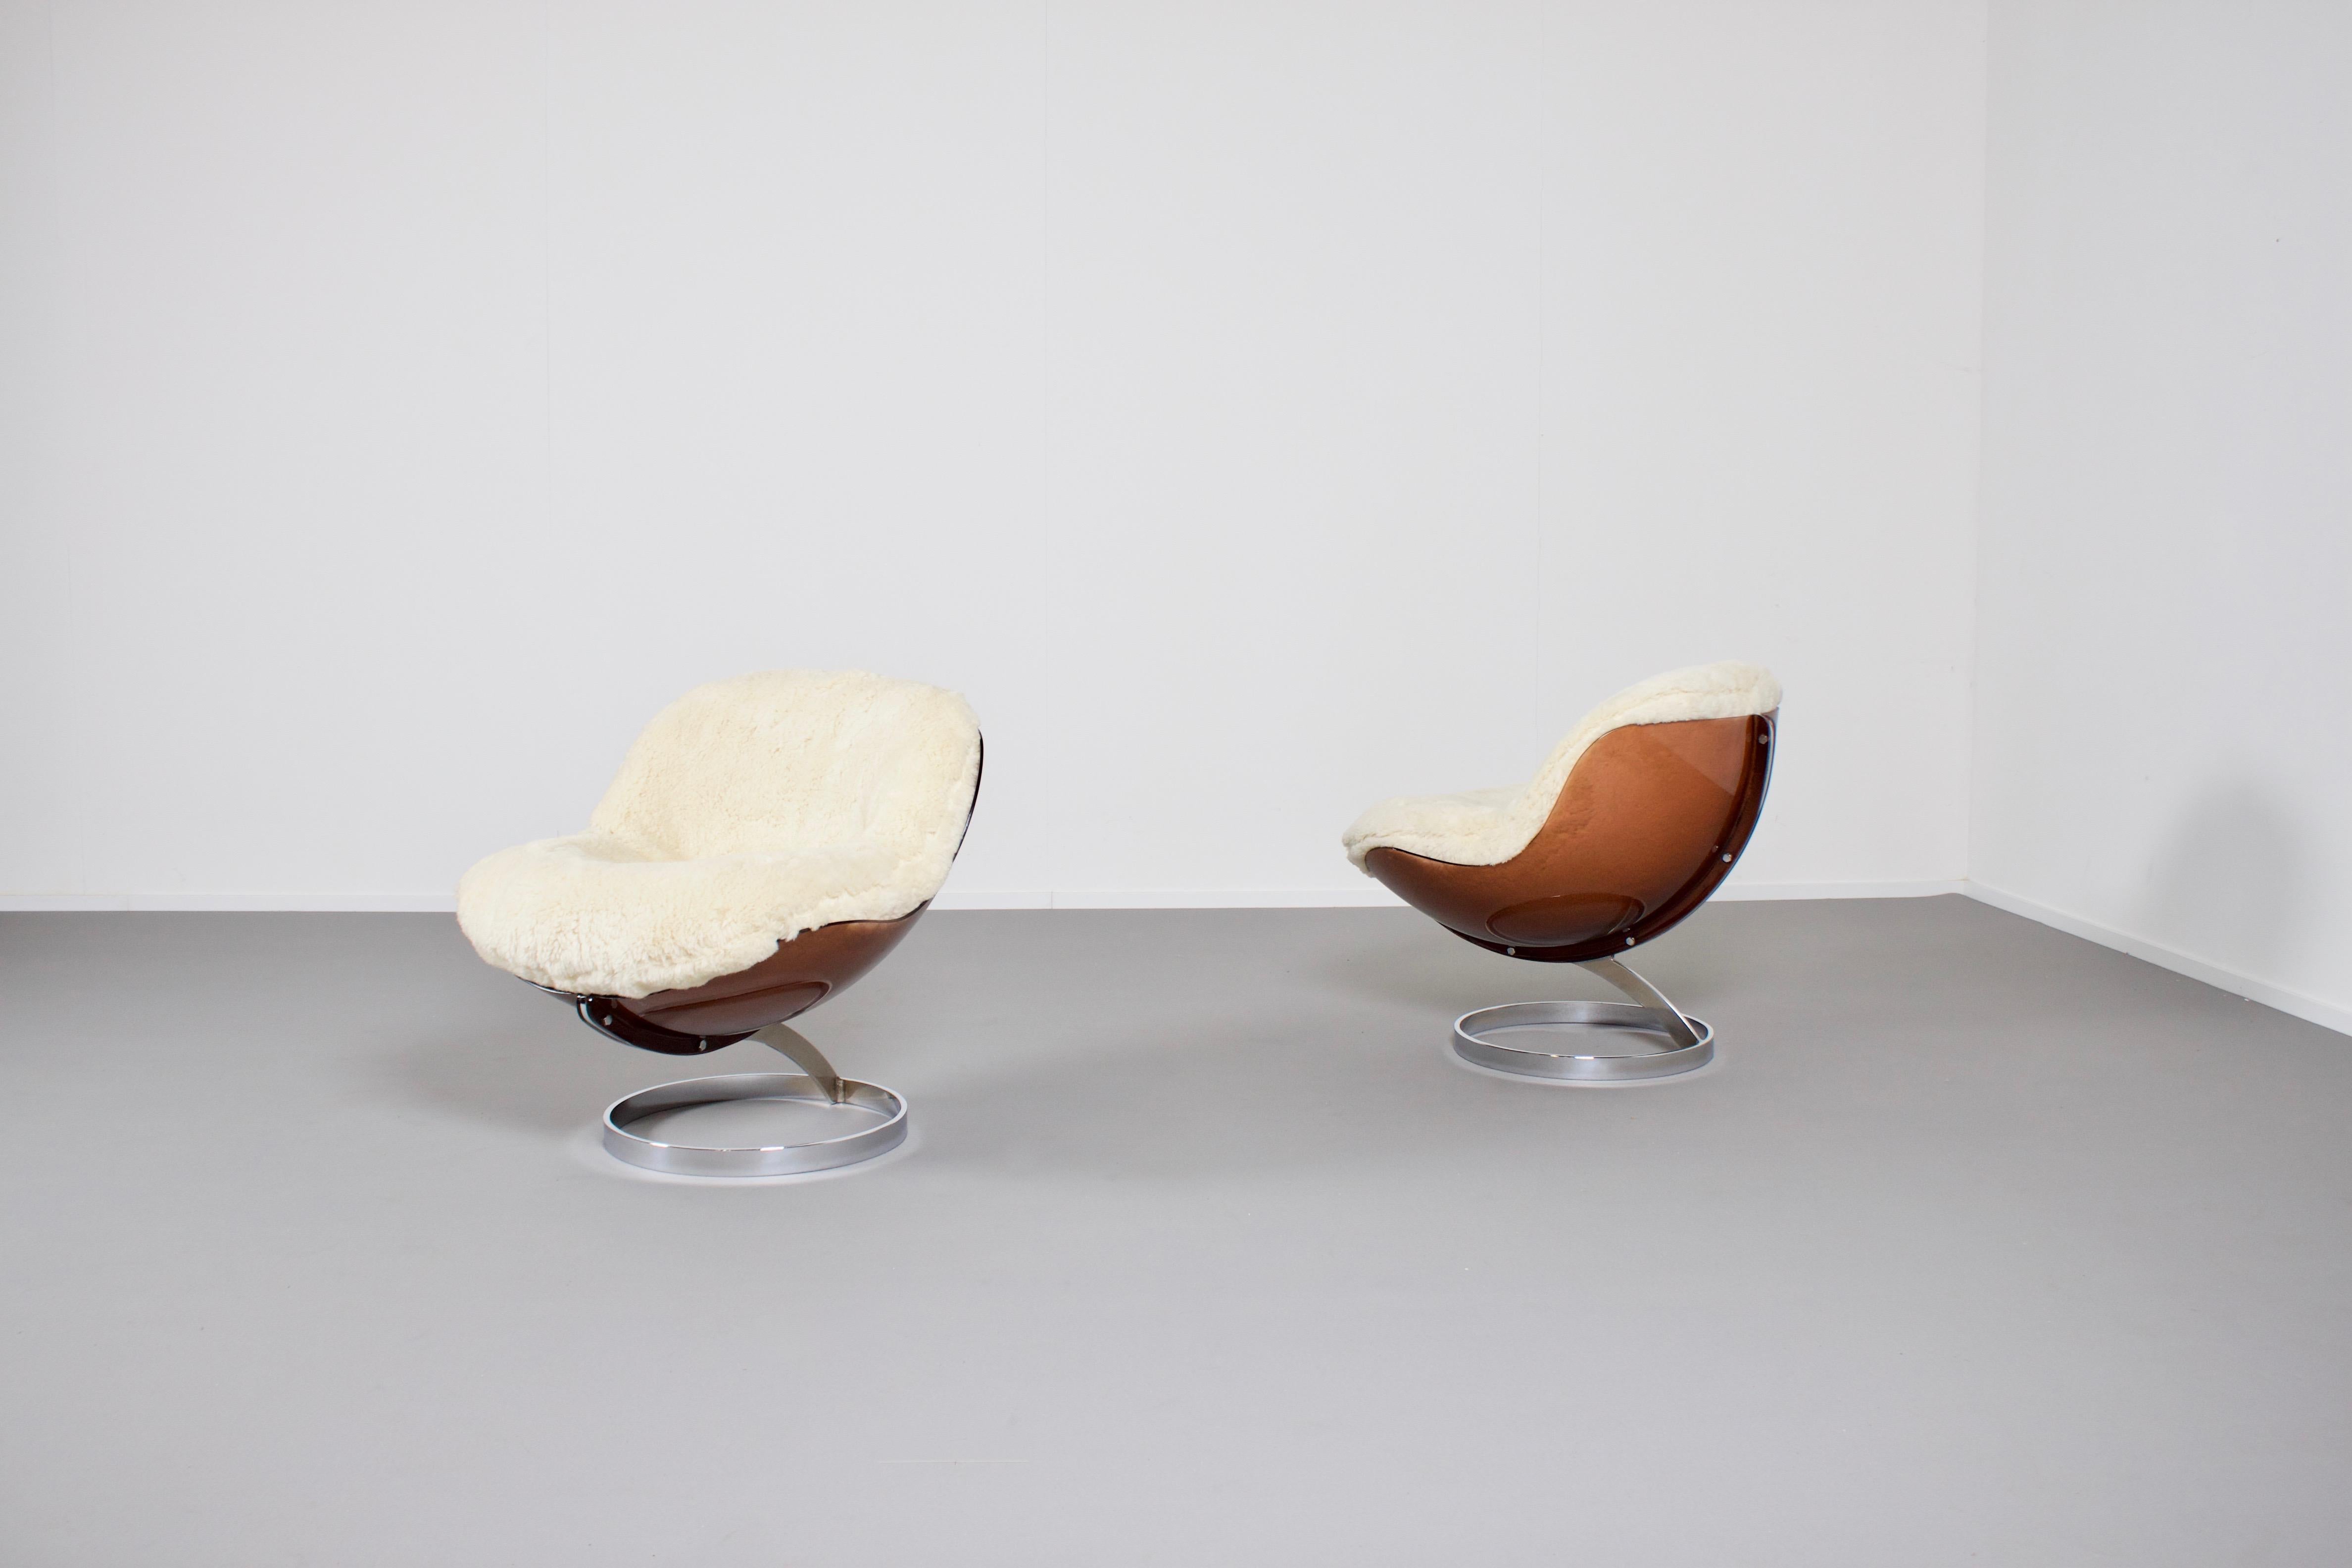 Set of beautiful and rare ’Sphere’ lounge chairs in very good condition.

Designed by Boris Tabacoff in 1971

Manufactured by the French MMM. factory (Mobilier Modular Moderne)

These chairs have a characteristic brown lucite shell which holds a